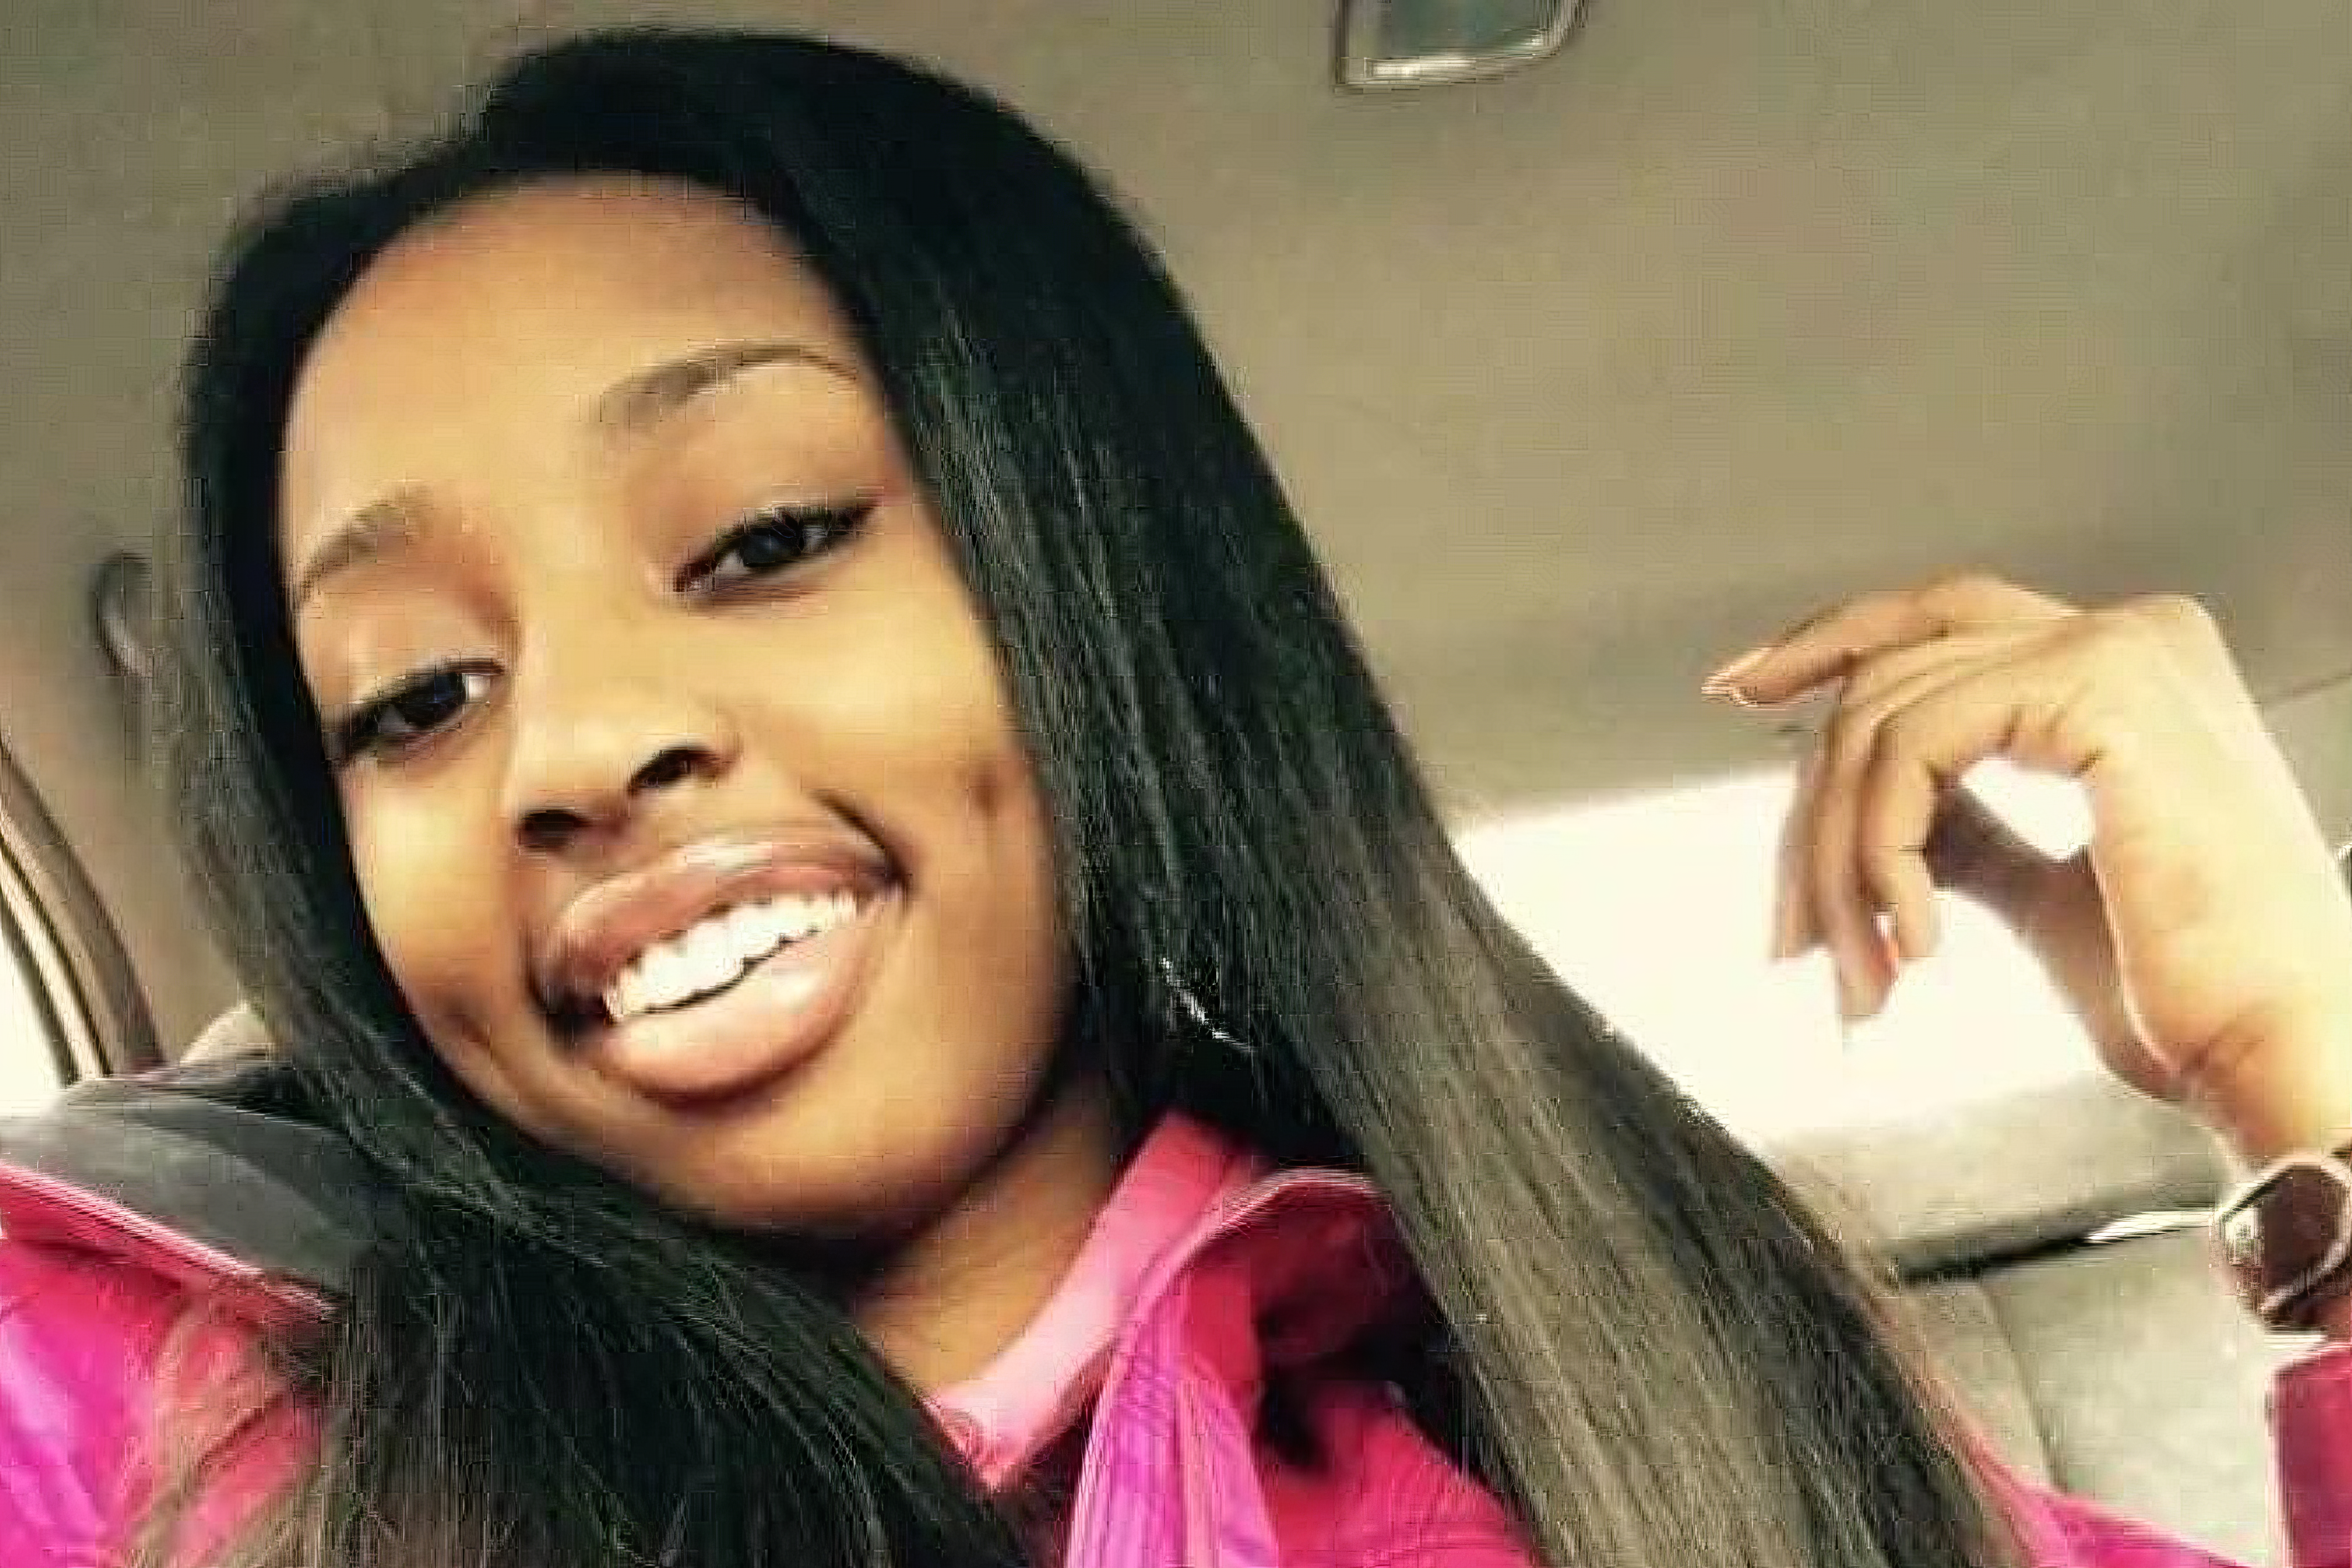 Kenneka Jenkins' Family To Recieve $6 Million For Wrongful Death Settlement